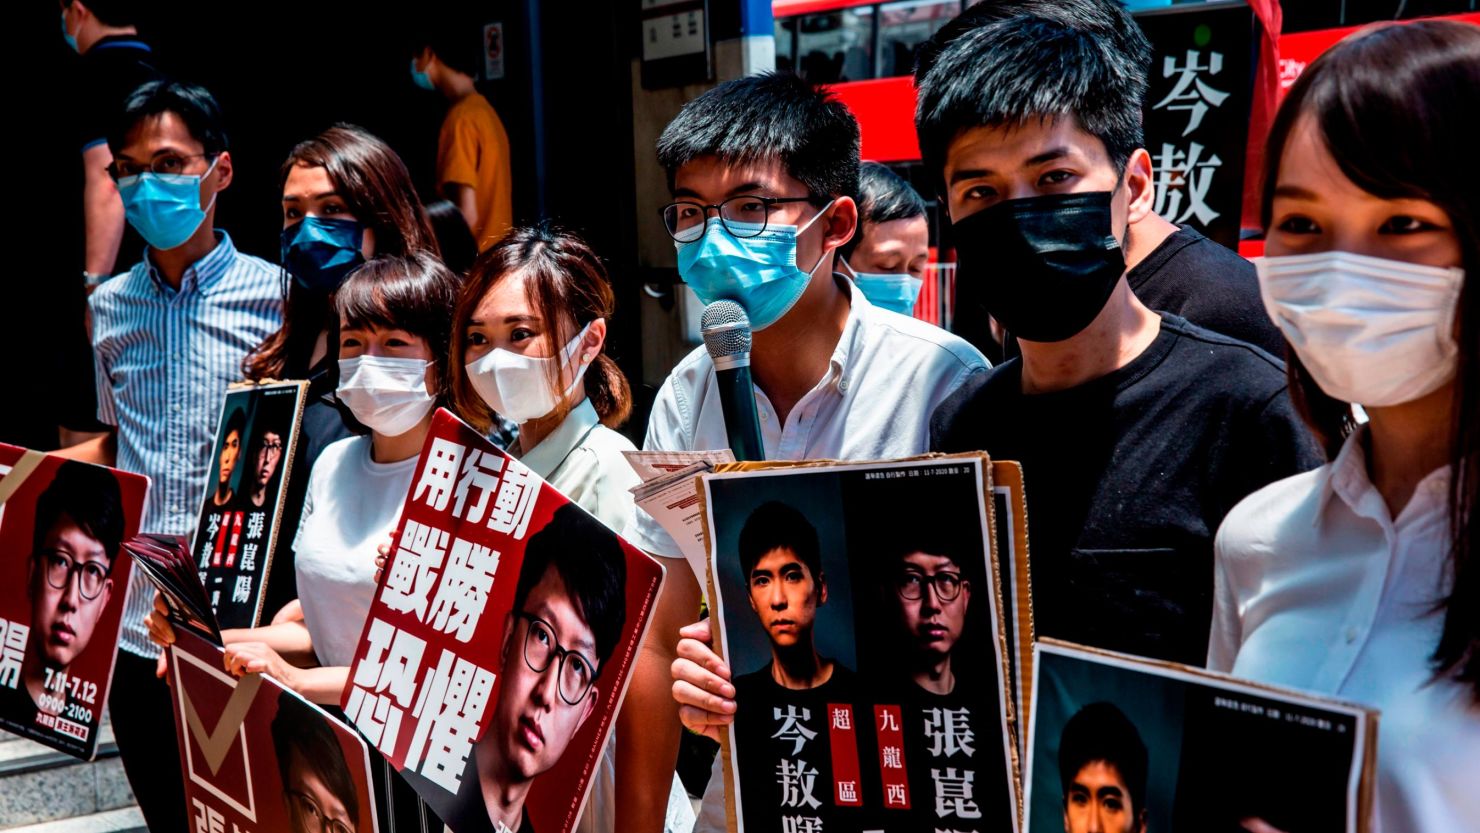 (L-R) Pro-democracy activists Eddie Chu, Gwyneth Ho, Leung Hoi-ching, Tiffany Yuen, Joshua Wong, Lester Shum and Agnes Chow campaign during primary elections in Hong Kong on July 12, 2020. - Pro-democracy parties in Hong Kong held primary polls on July 11 and 12 to choose candidates for upcoming legislative elections despite warnings from government officials that it may be in breach of a new security law imposed by China. (Photo by ISAAC LAWRENCE / AFP) (Photo by ISAAC LAWRENCE/AFP via Getty Images)